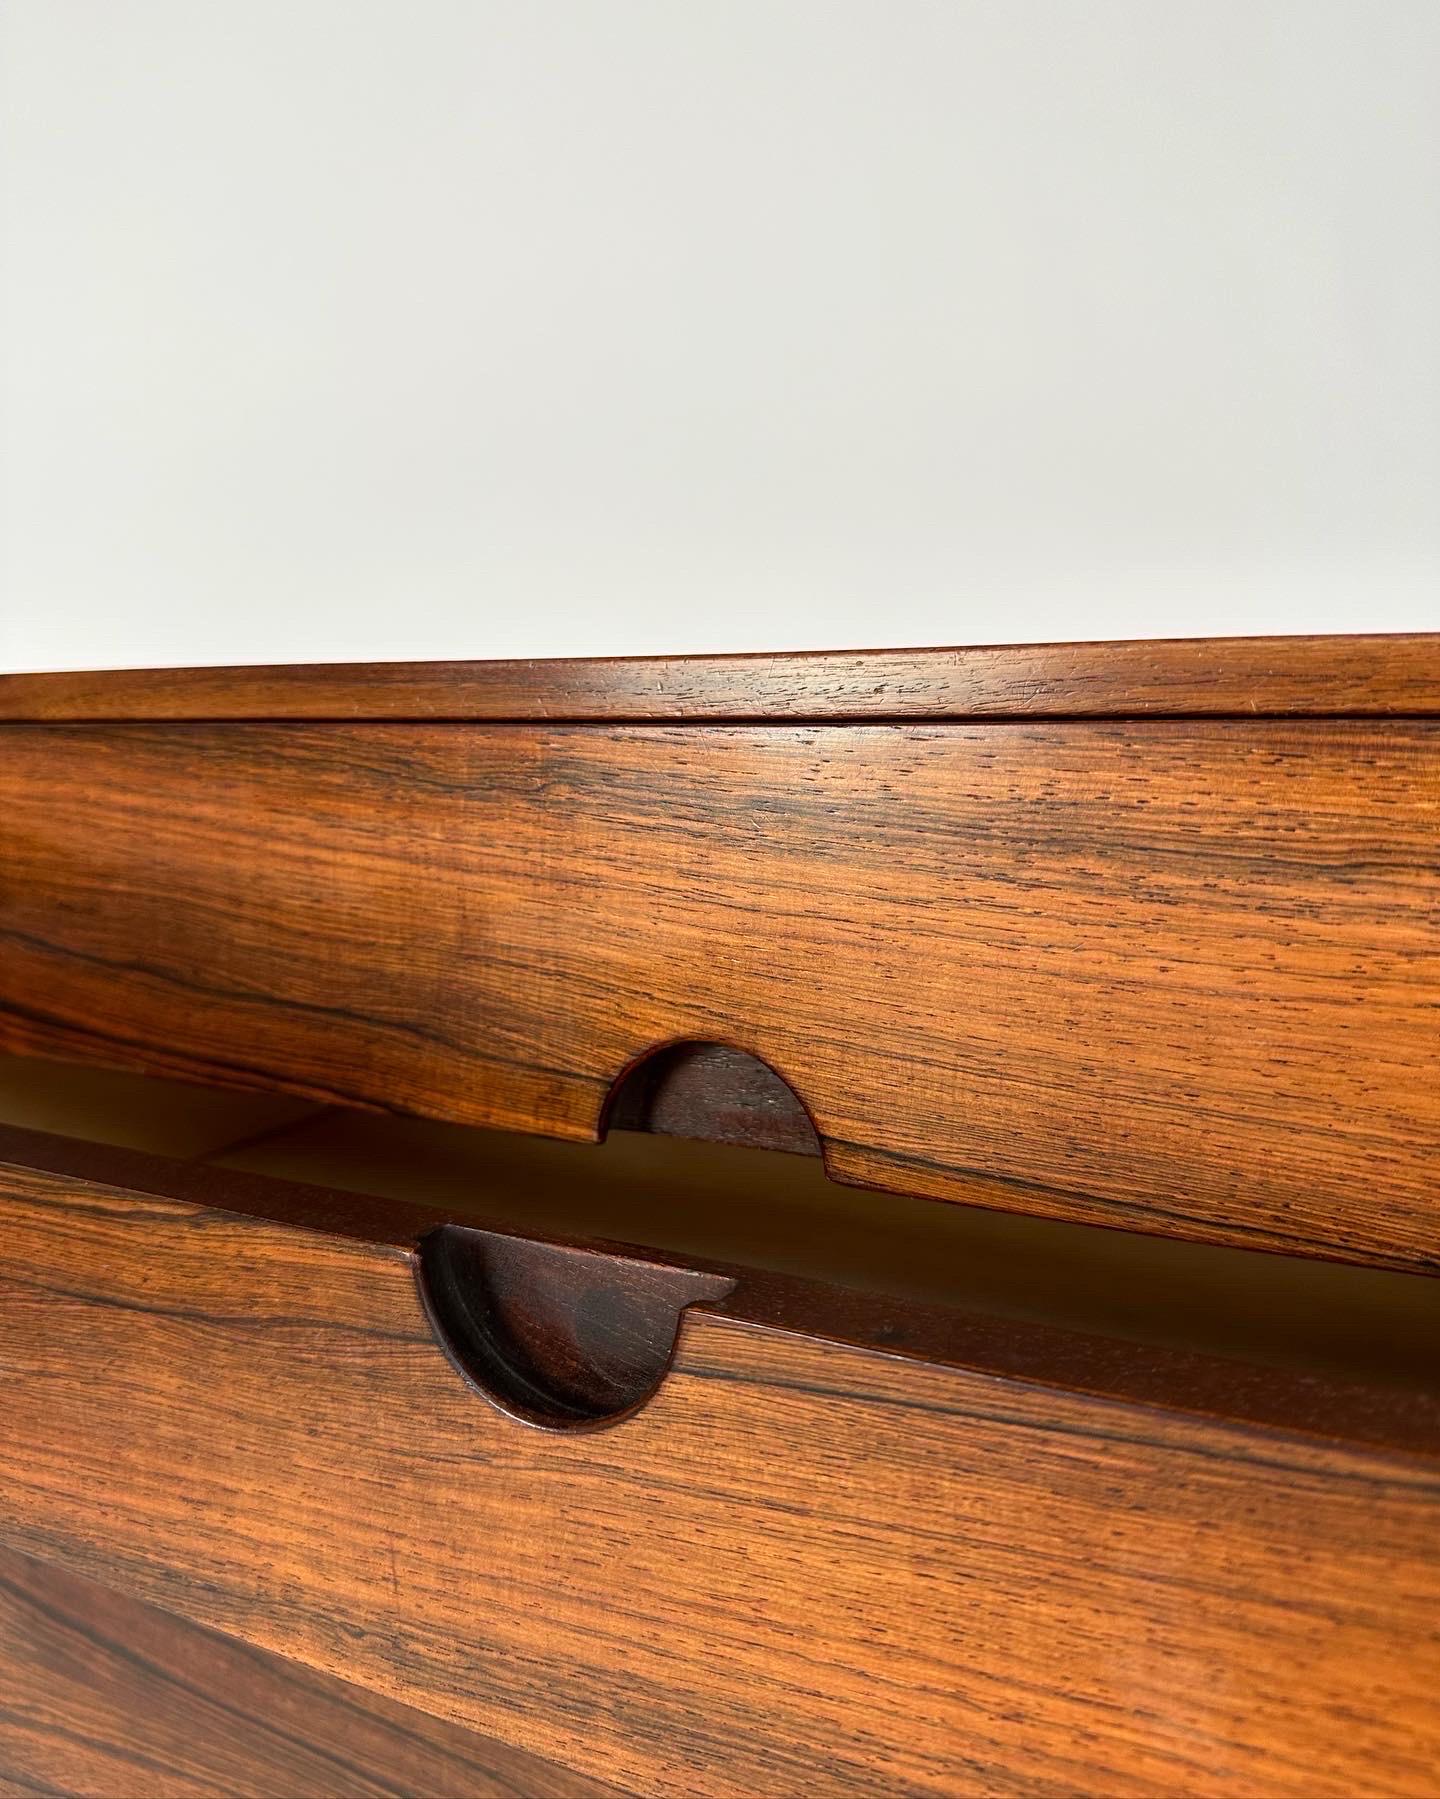 Hand-Crafted Kai Kristiansen Chest of Drawers Aksel Kjersgaard Denmark Rosewood Commode 1960s For Sale